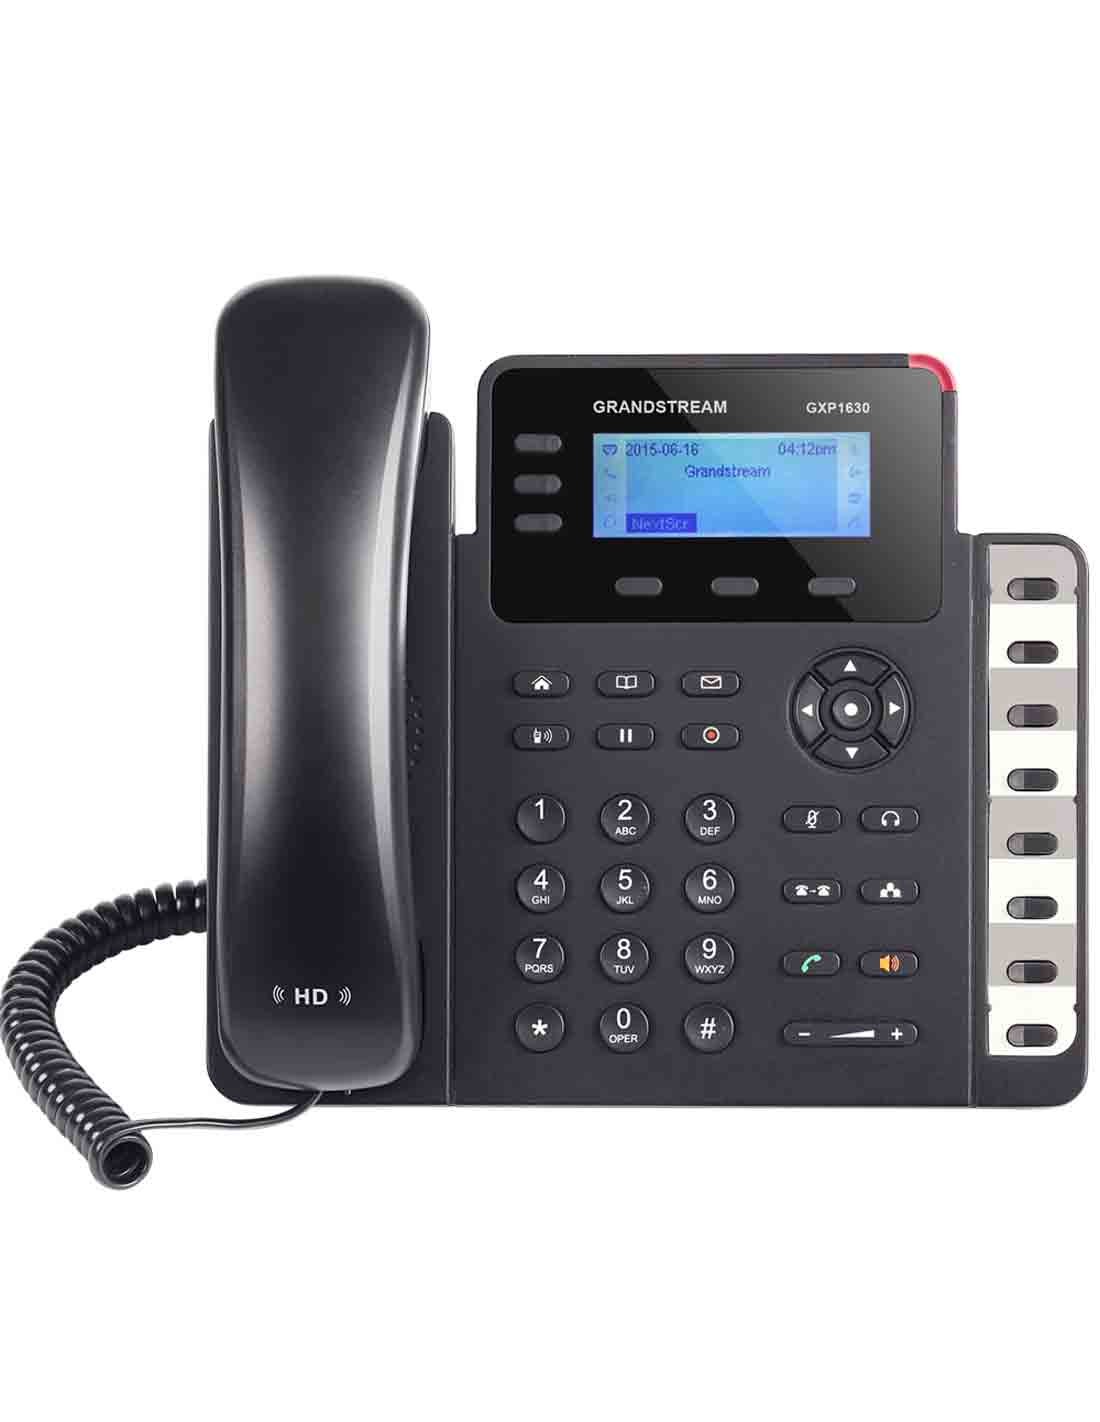 Grandstream GXP1630 IP Phone 3 SIP Accounts at a cheap price and free delivery in Dubai UAE